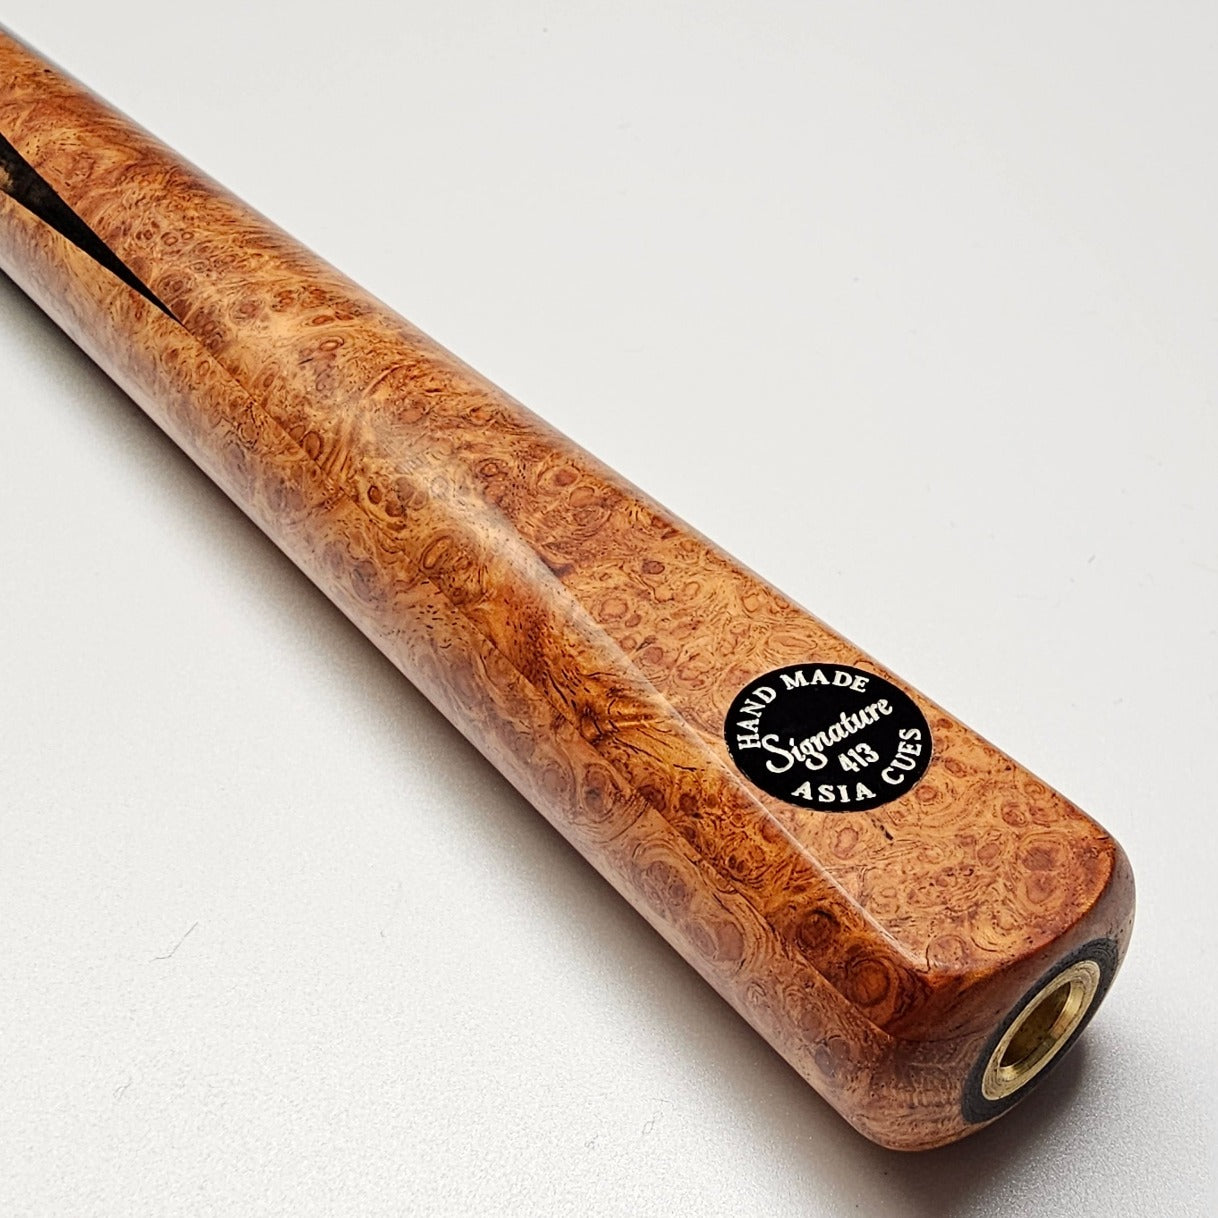 Asia Cues Signature No.413 - One Piece Pool Cue  Handmade Ebony Butt with 4 lower splices of Amboyna Burl. Badge View